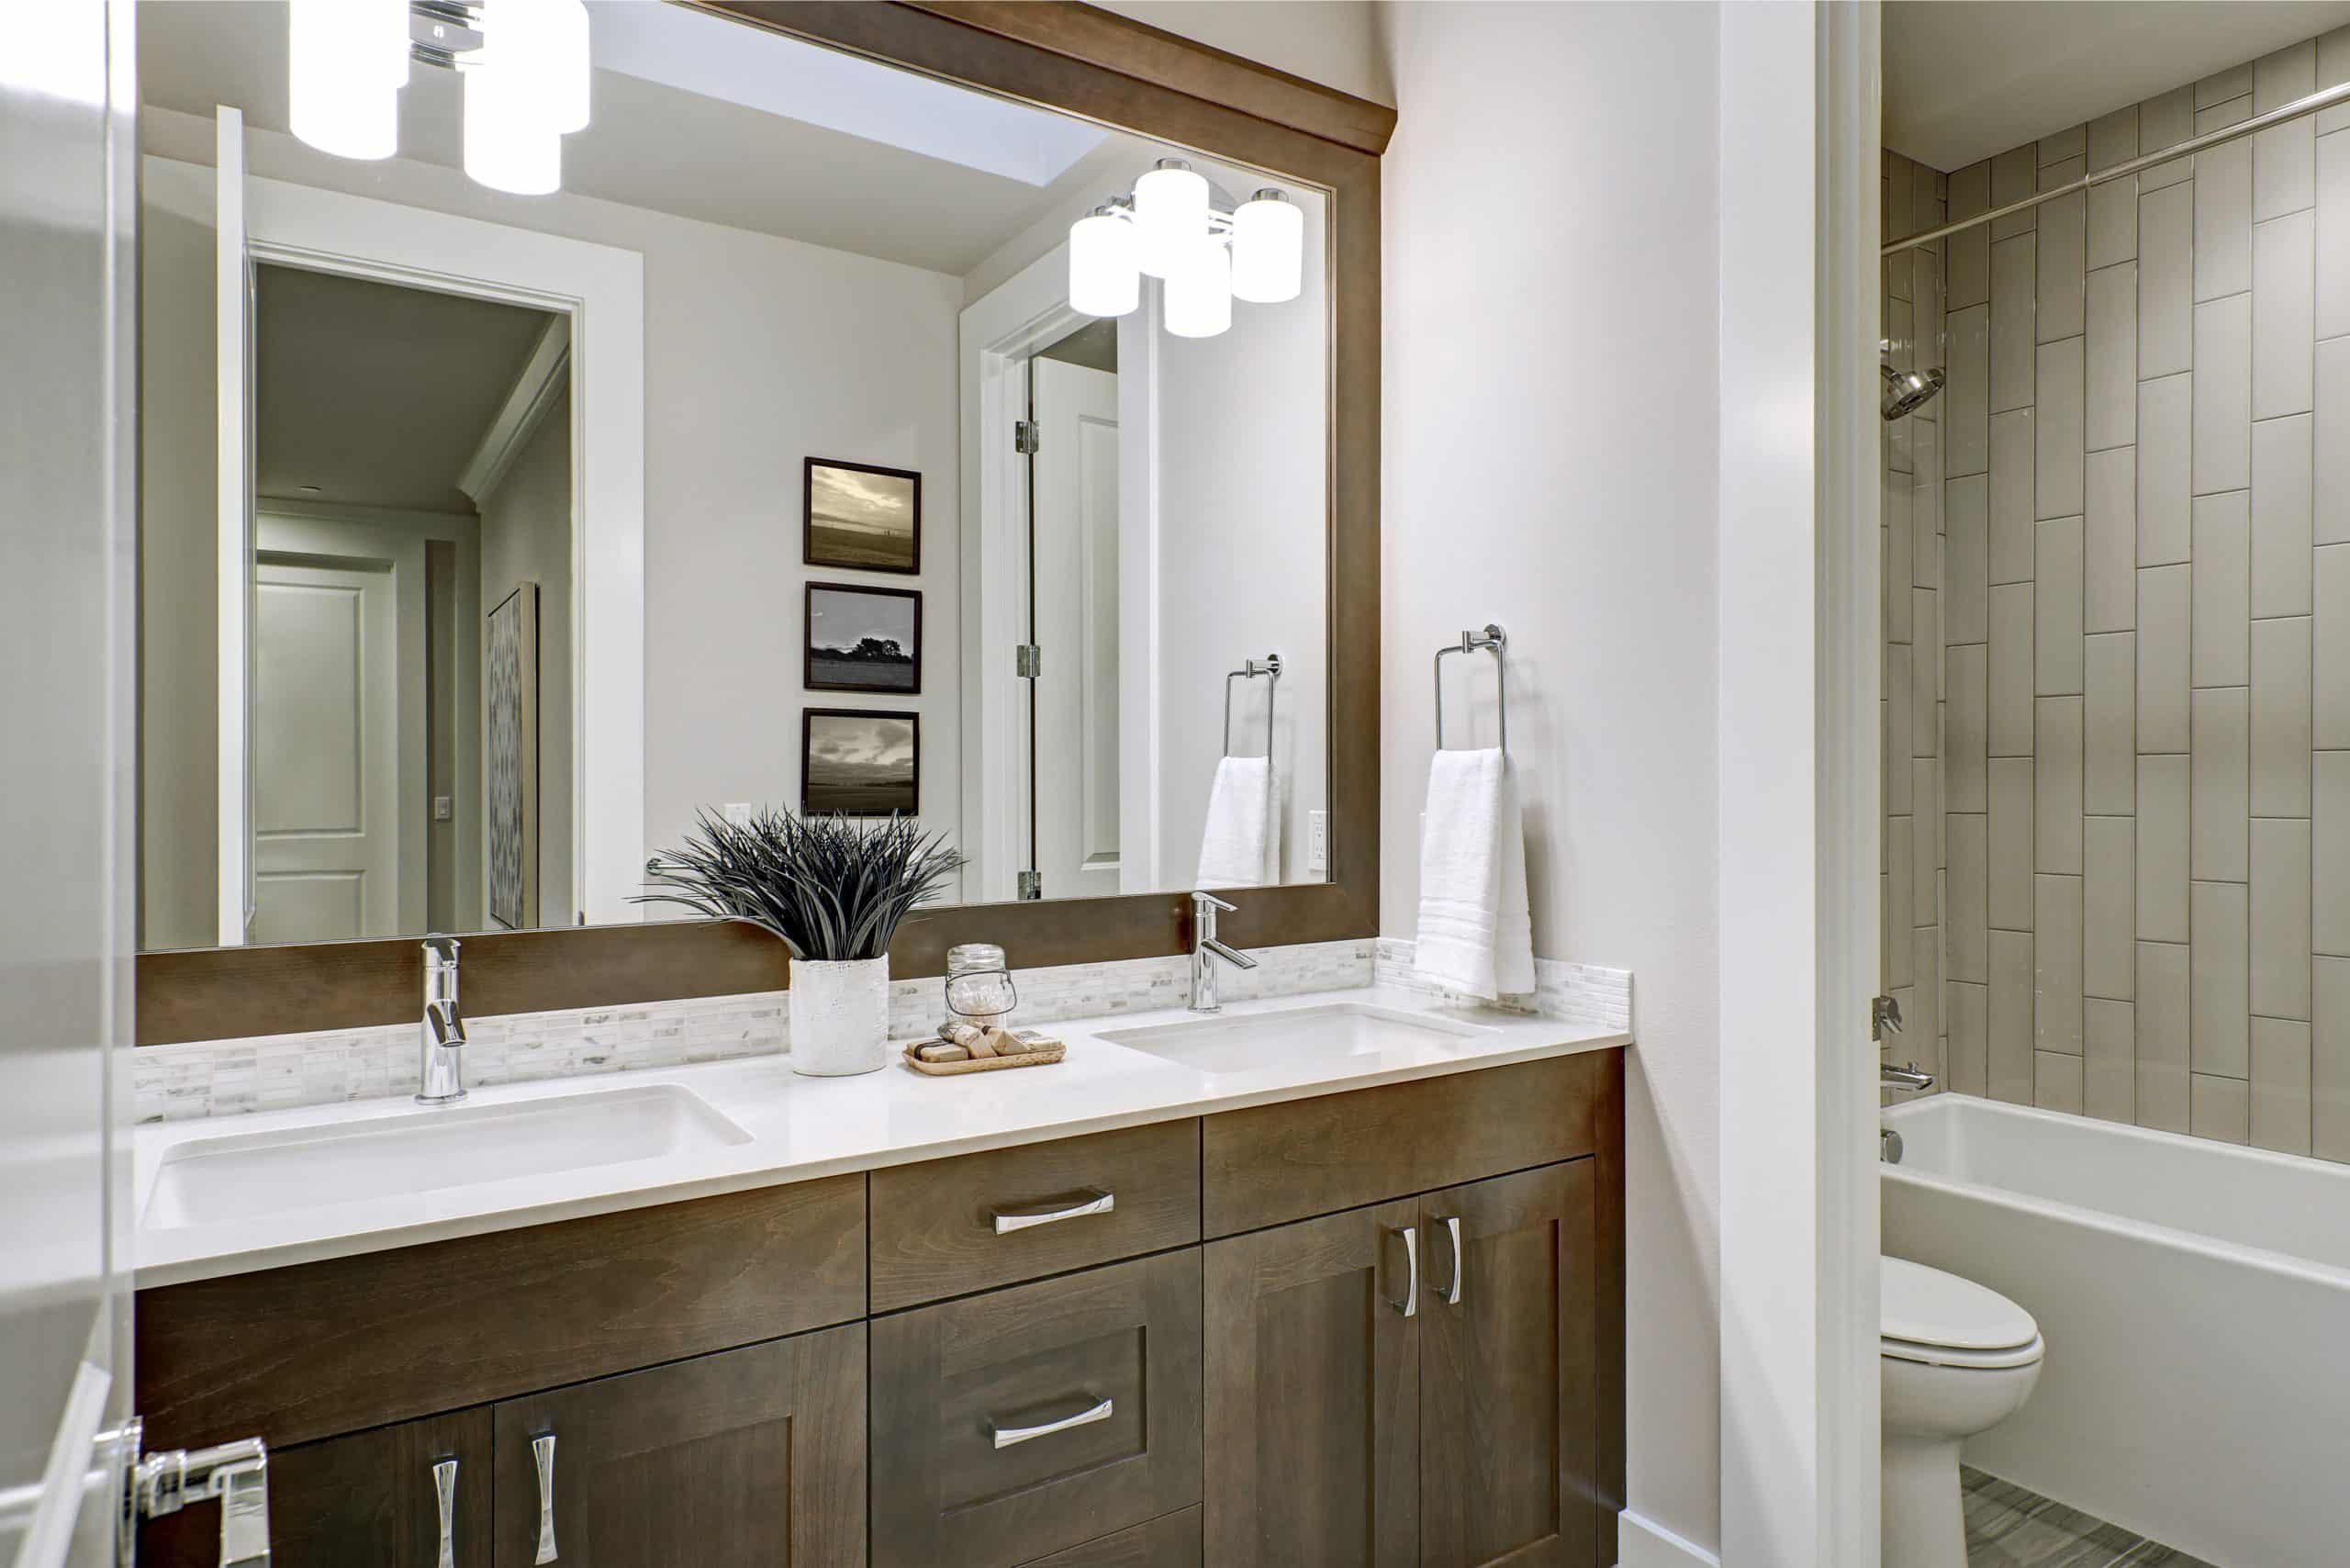 4 Things to Consider for a Guest Bathroom Renovation Project